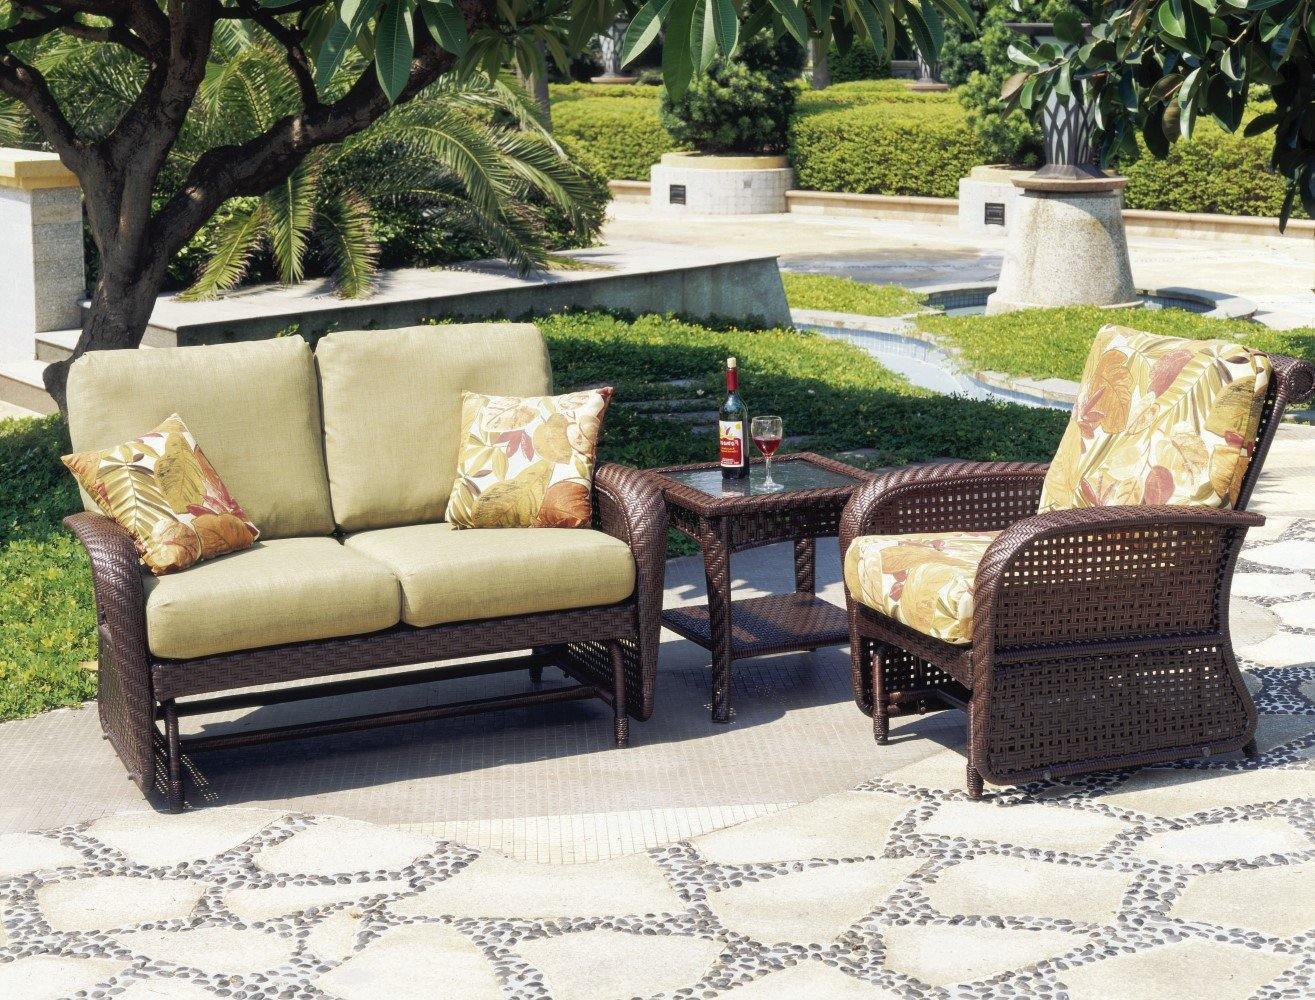 South Sea Outdoor Living Patio Furniture Martinique End Table by South Sea Outdoor Living - 75243